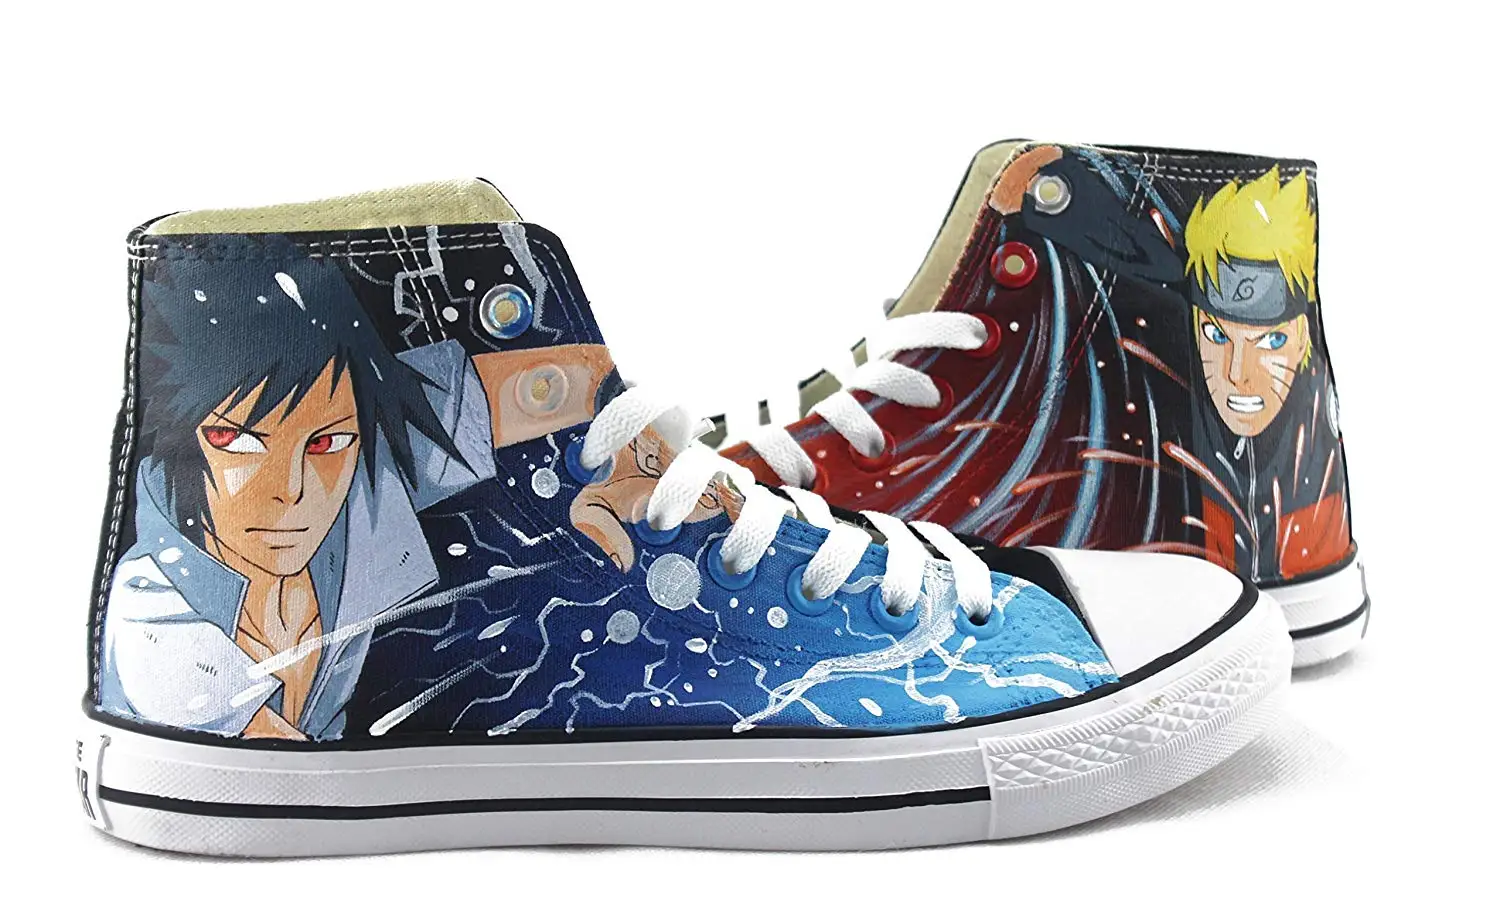 Cheap Drawing Anime Shoes Find Drawing Anime Shoes Deals On Line At Alibaba Com I just learned from looking at hands and feet and trying to draw as close to what i saw as i can. cheap drawing anime shoes find drawing